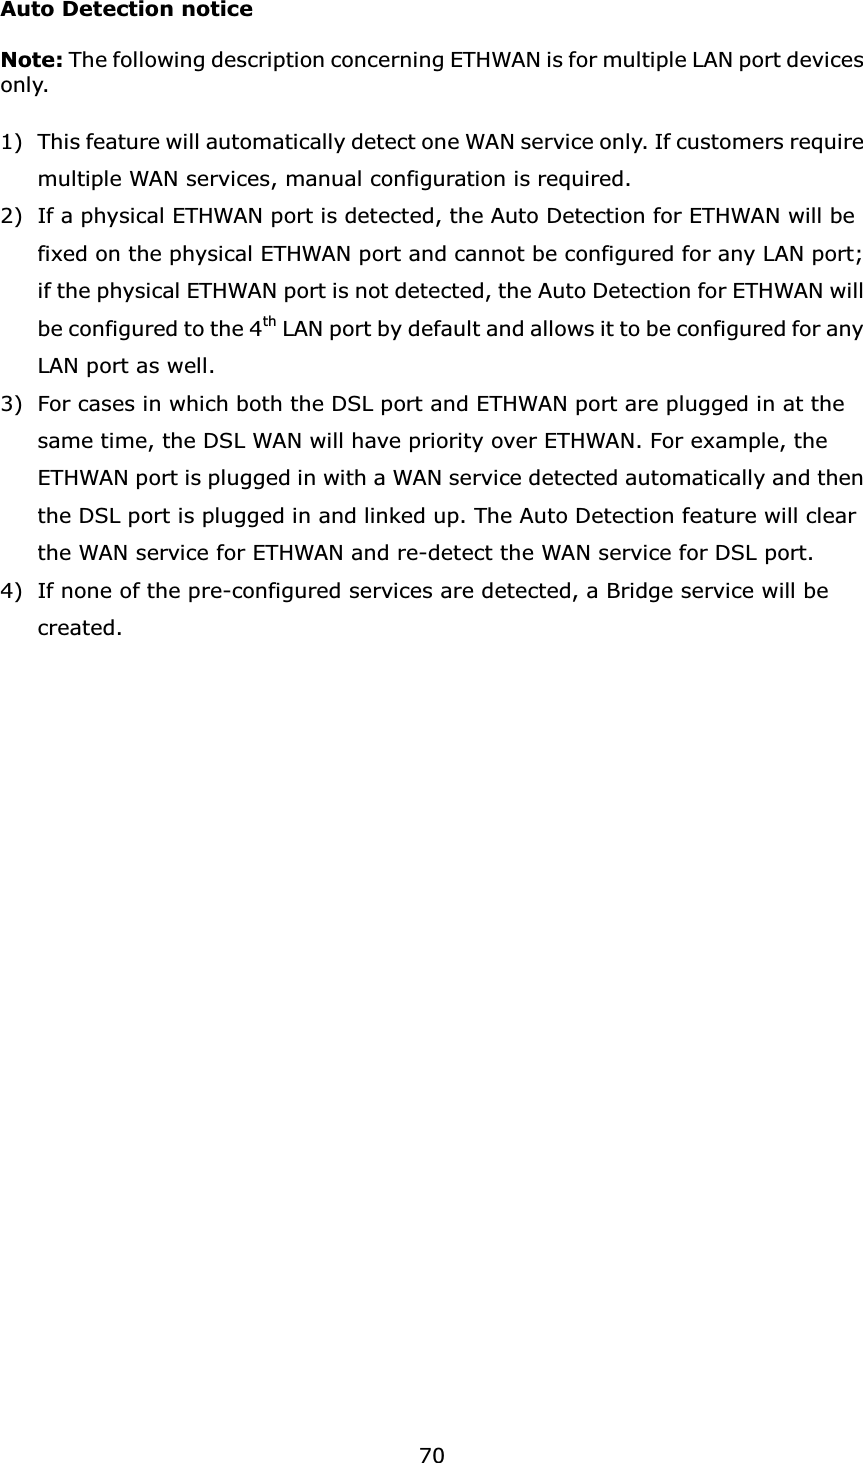  70 Auto Detection notice  Note: The following description concerning ETHWAN is for multiple LAN port devices only.ġ 1) This feature will automatically detect one WAN service only. If customers require multiple WAN services, manual configuration is required. 2) If a physical ETHWAN port is detected, the Auto Detection for ETHWAN will be fixed on the physical ETHWAN port and cannot be configured for any LAN port; if the physical ETHWAN port is not detected, the Auto Detection for ETHWAN will be configured to the 4th LAN port by default and allows it to be configured for any LAN port as well. 3) For cases in which both the DSL port and ETHWAN port are plugged in at the same time, the DSL WAN will have priority over ETHWAN. For example, the ETHWAN port is plugged in with a WAN service detected automatically and then the DSL port is plugged in and linked up. The Auto Detection feature will clear the WAN service for ETHWAN and re-detect the WAN service for DSL port. 4) If none of the pre-configured services are detected, a Bridge service will be created.    